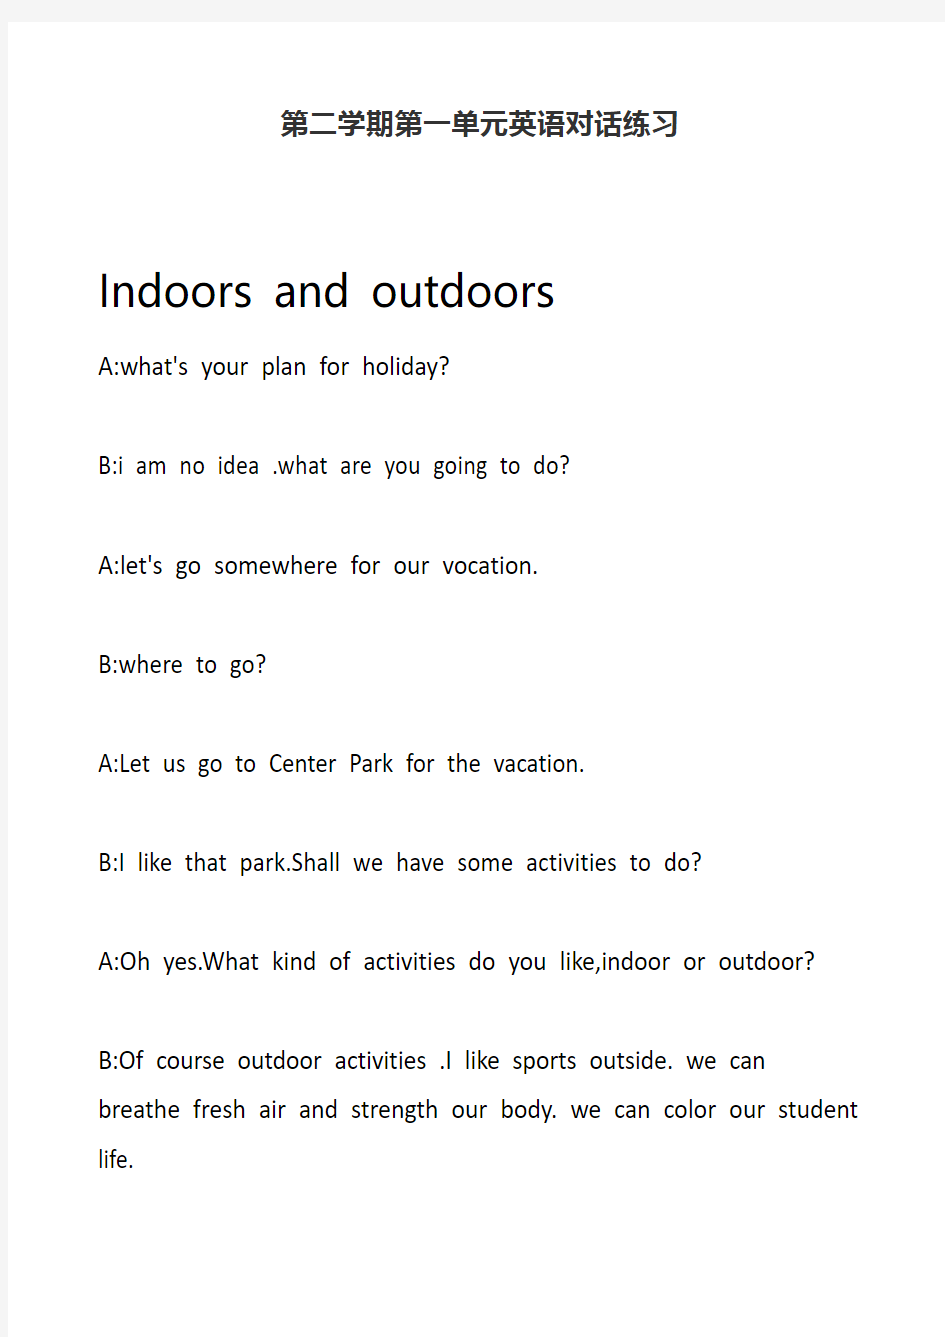 Indoors and outdoors两人英语对话